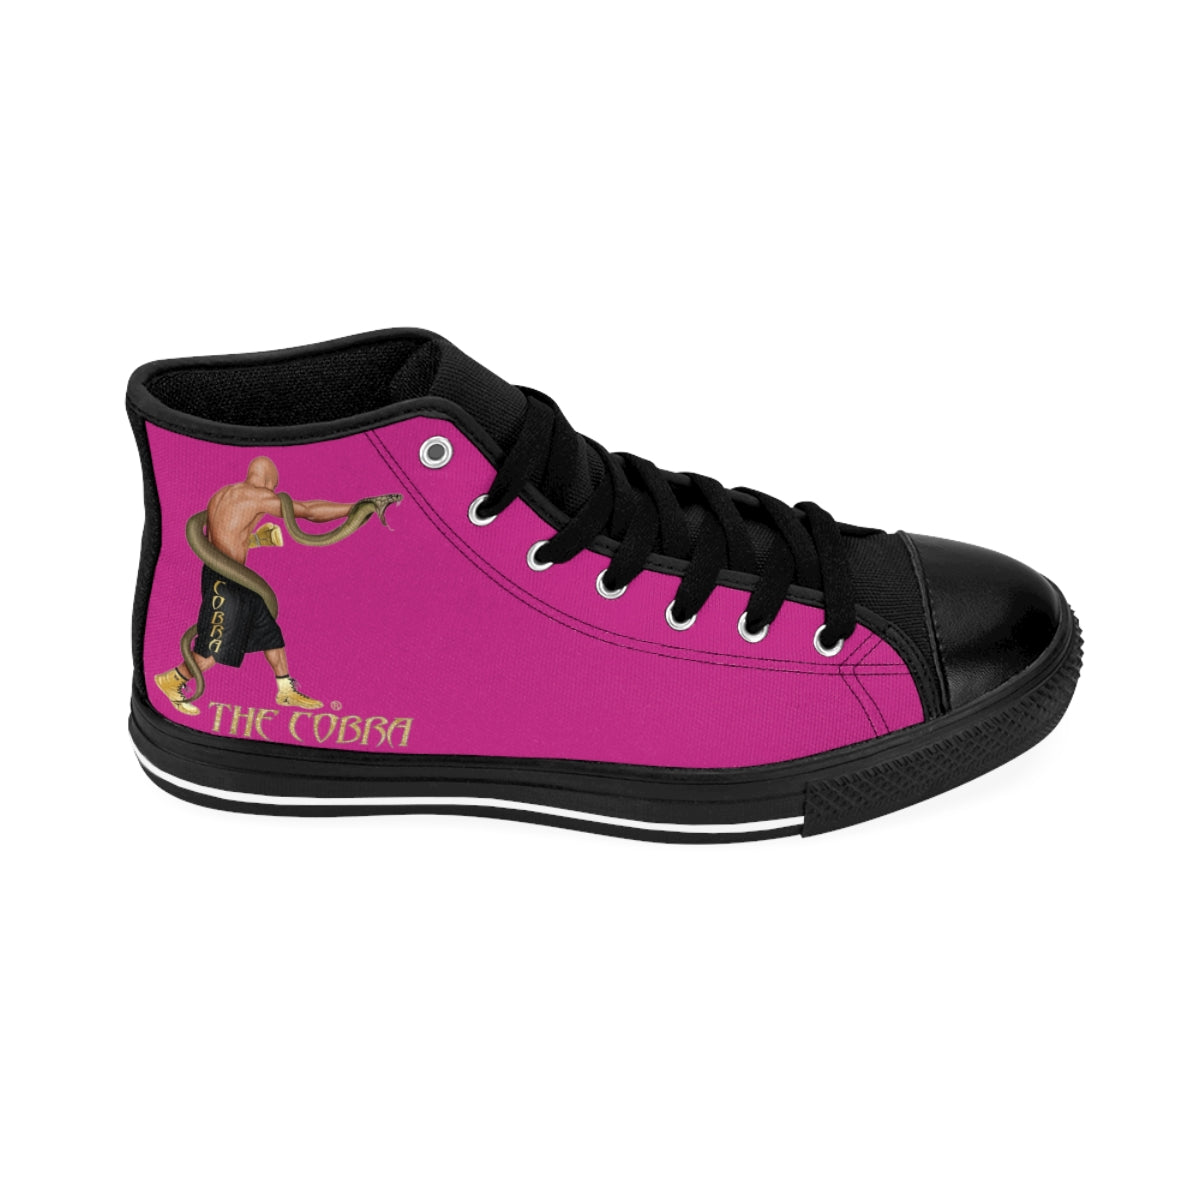 Pink Women's High-top Sneakers Logos Only